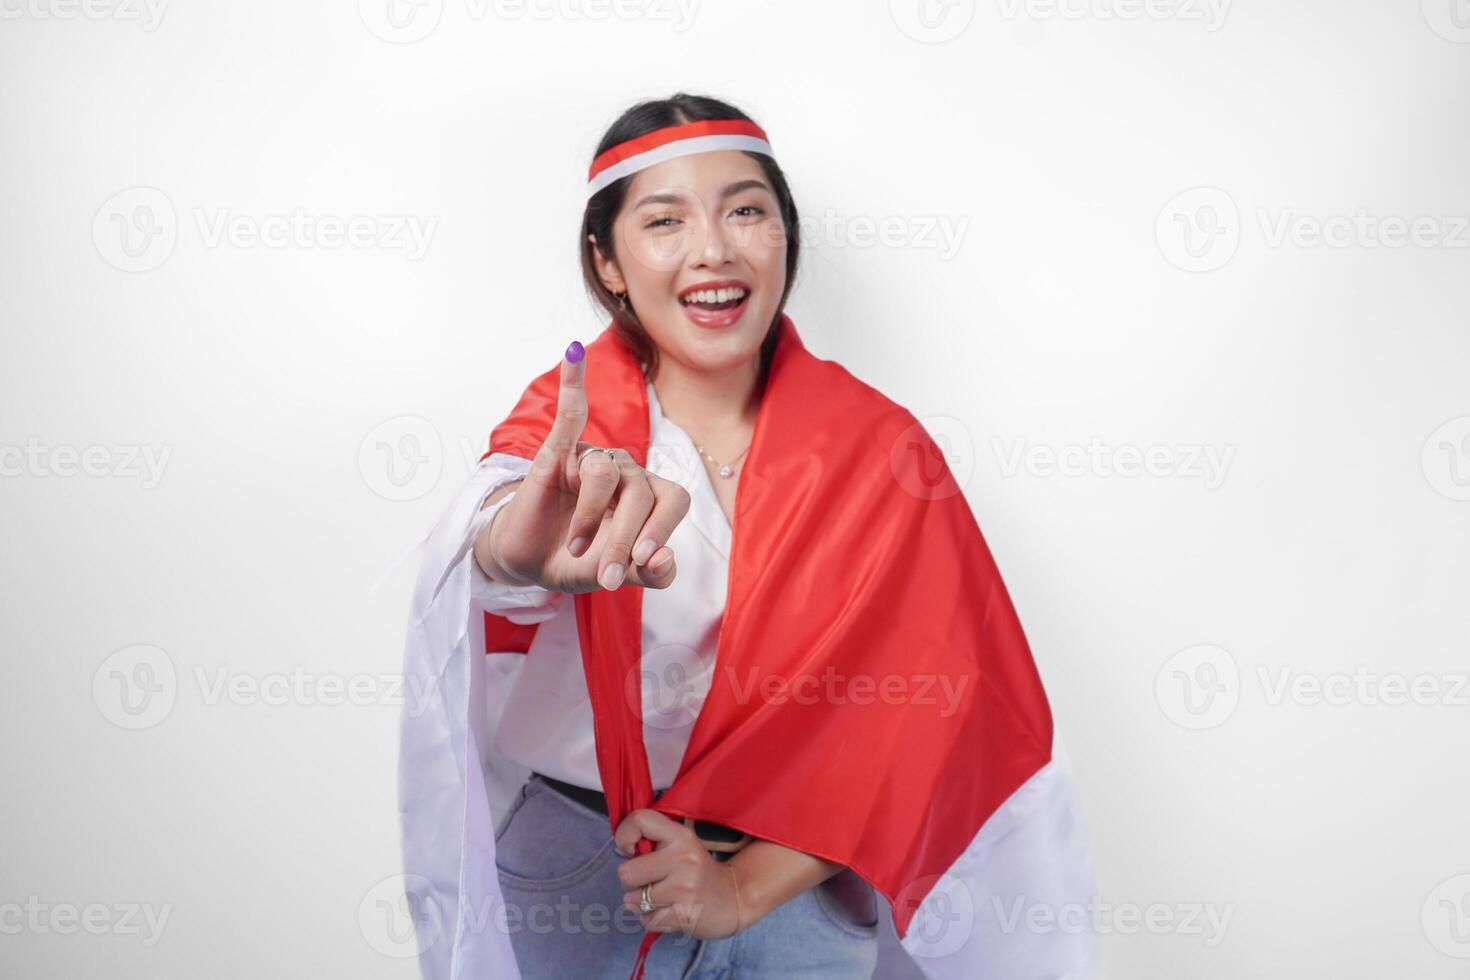 Excited Indonesian woman proudly showing little finger dipped in purple ink after voting for president and parliament election, wearing mini flag headband and white shirt, covering flag on the back photo